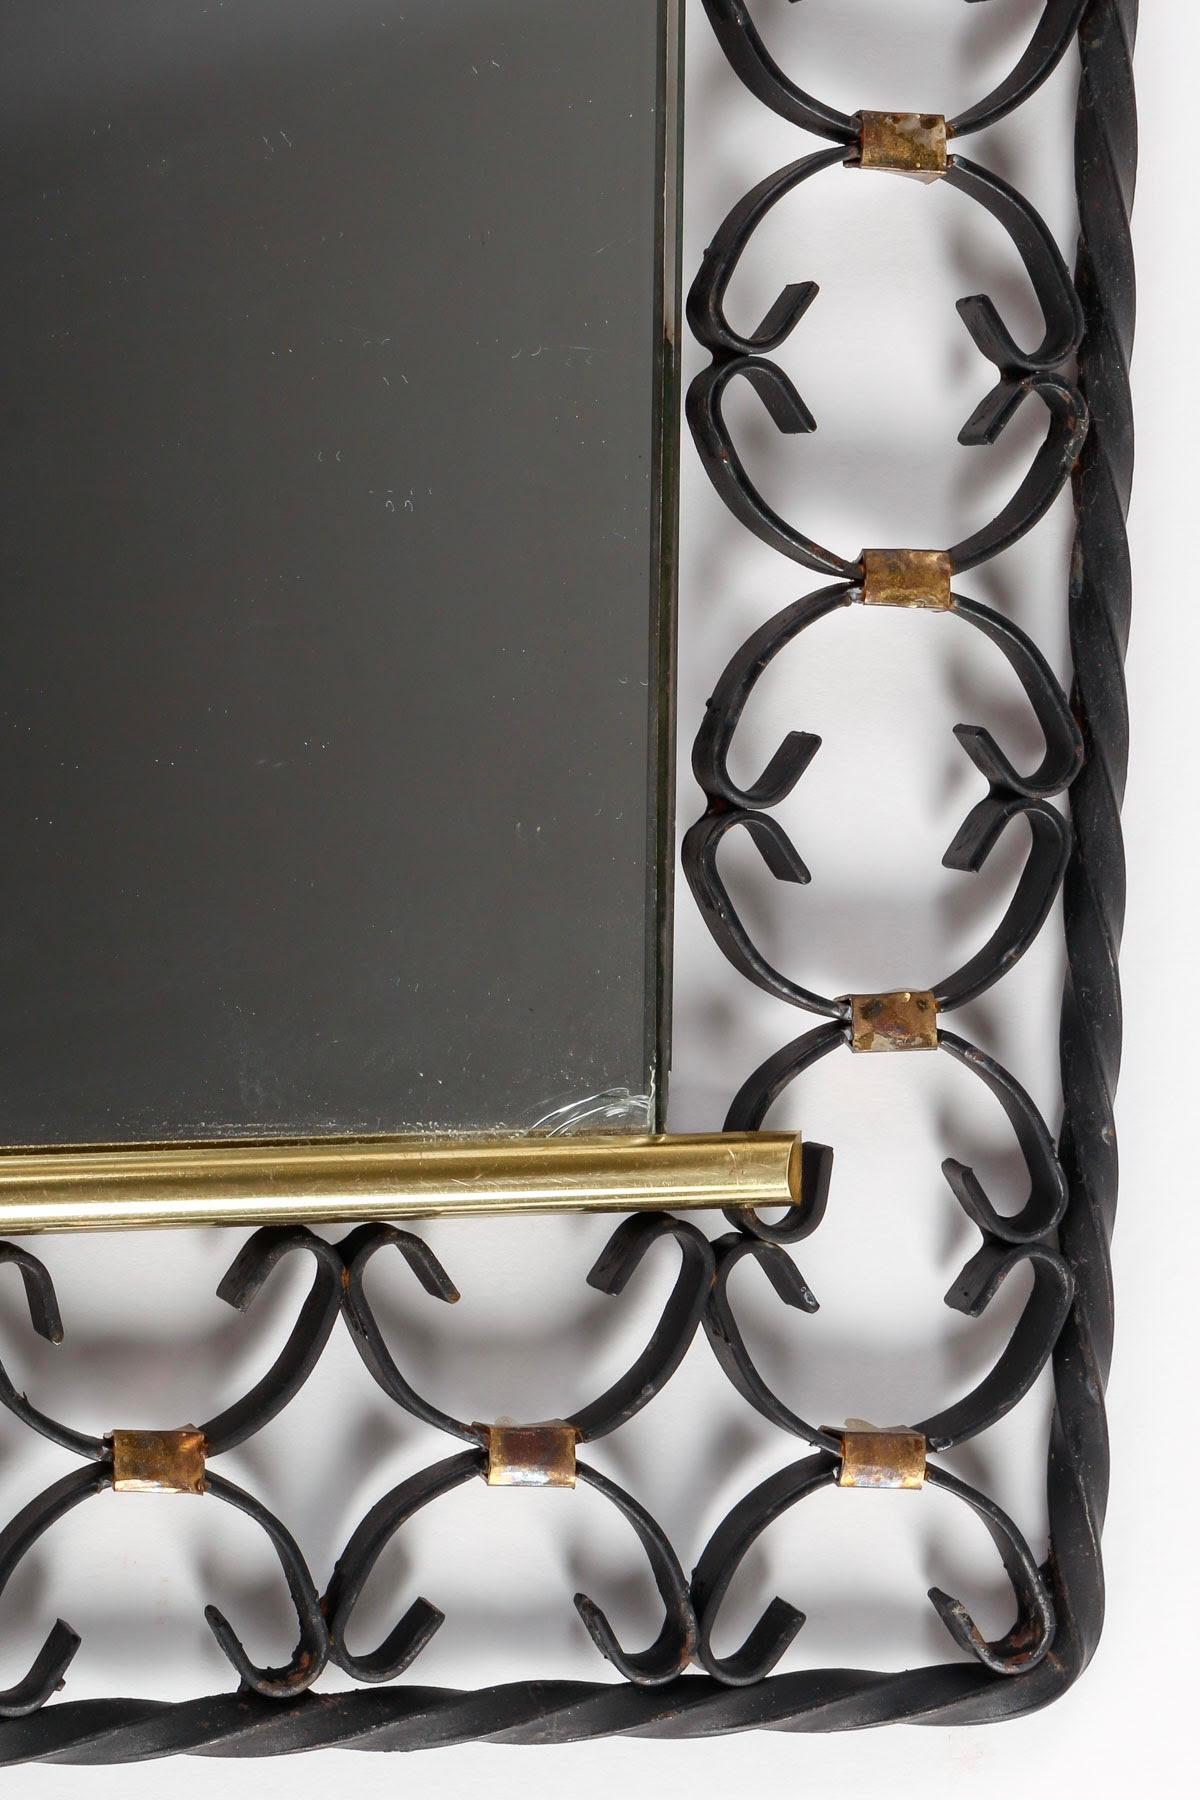 Mid-Century Modern Wrought Iron and Brass Mirror, 1950s-1960s Design. For Sale